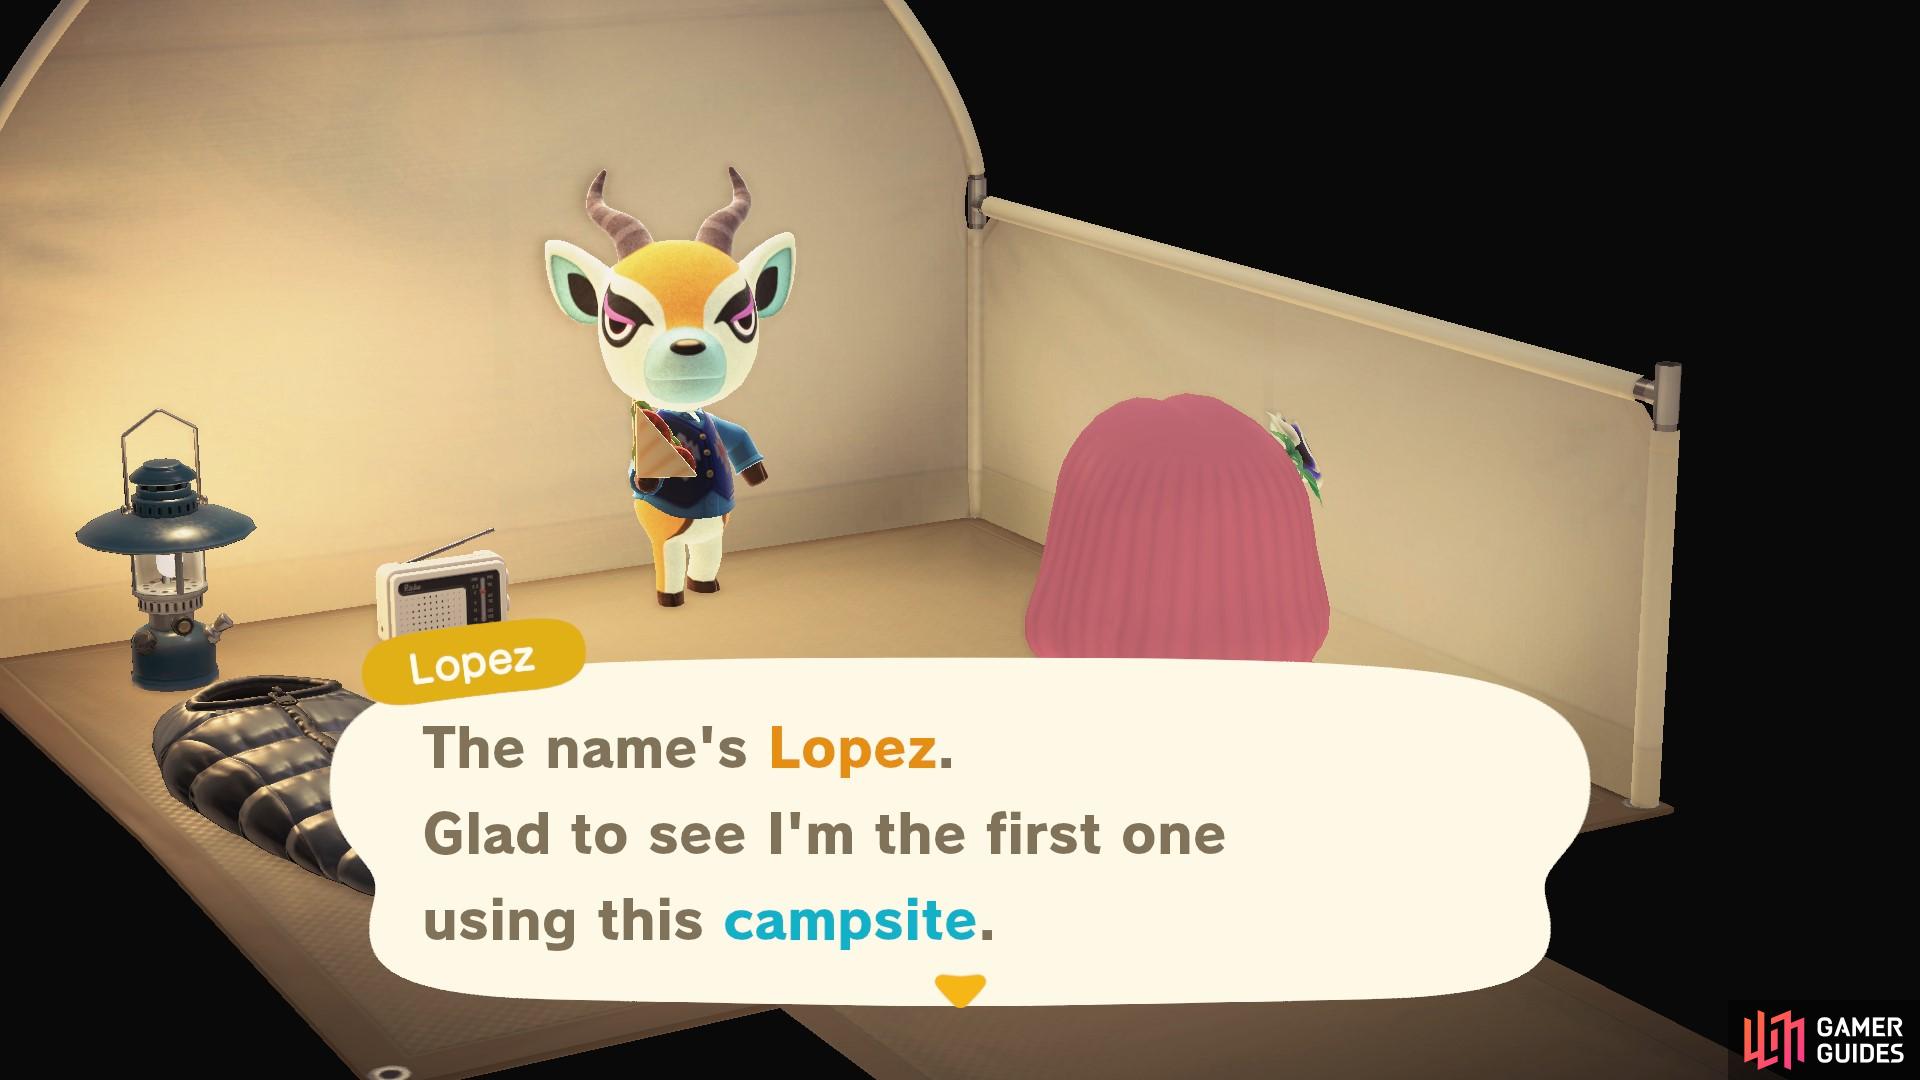 Lopez is the first tourist to use this campsite!